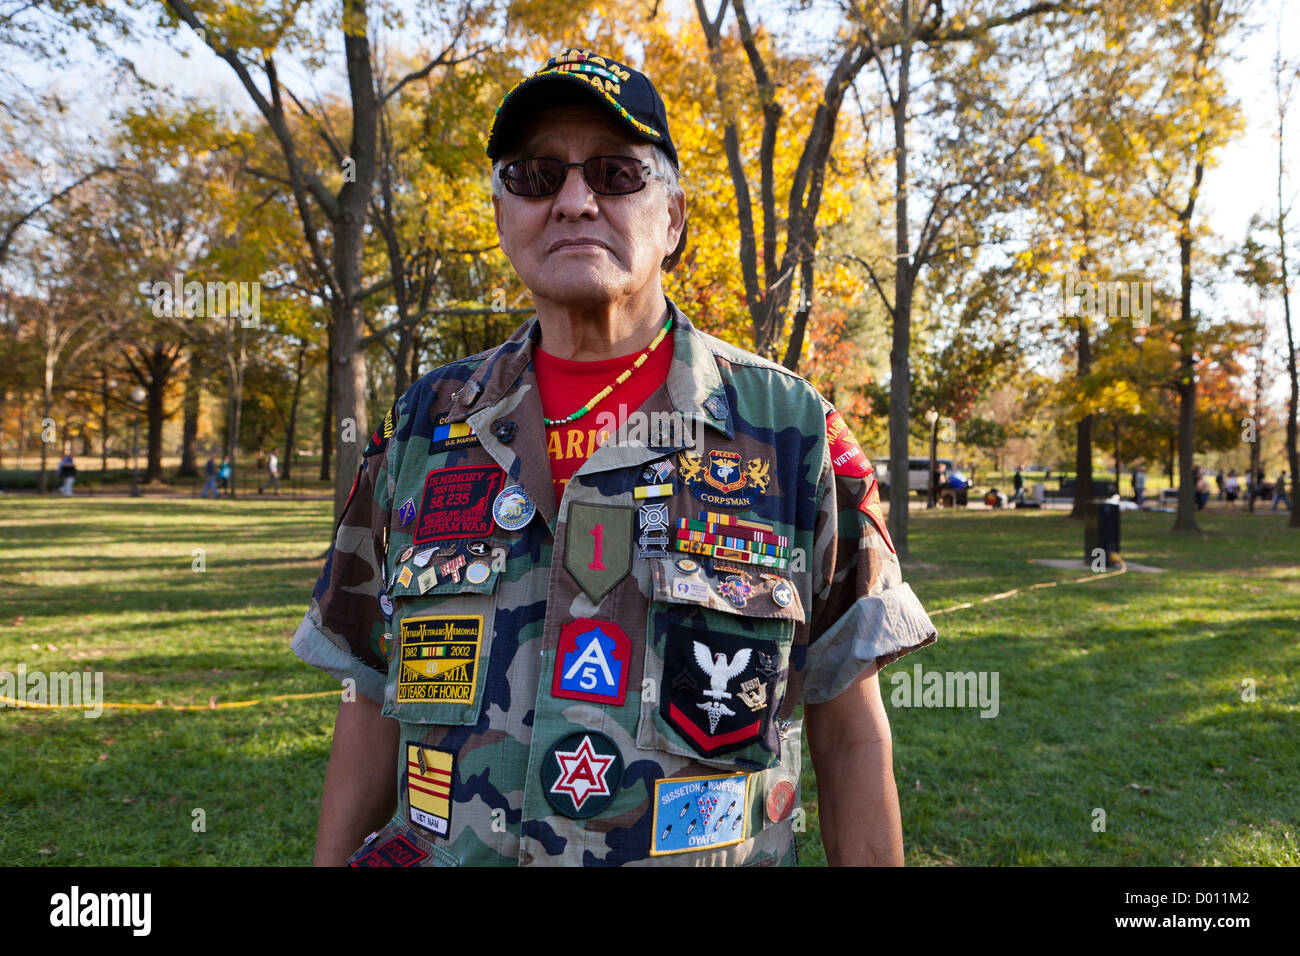 American-Indian US Vietnam War veteran with medals and honors Stock Photo